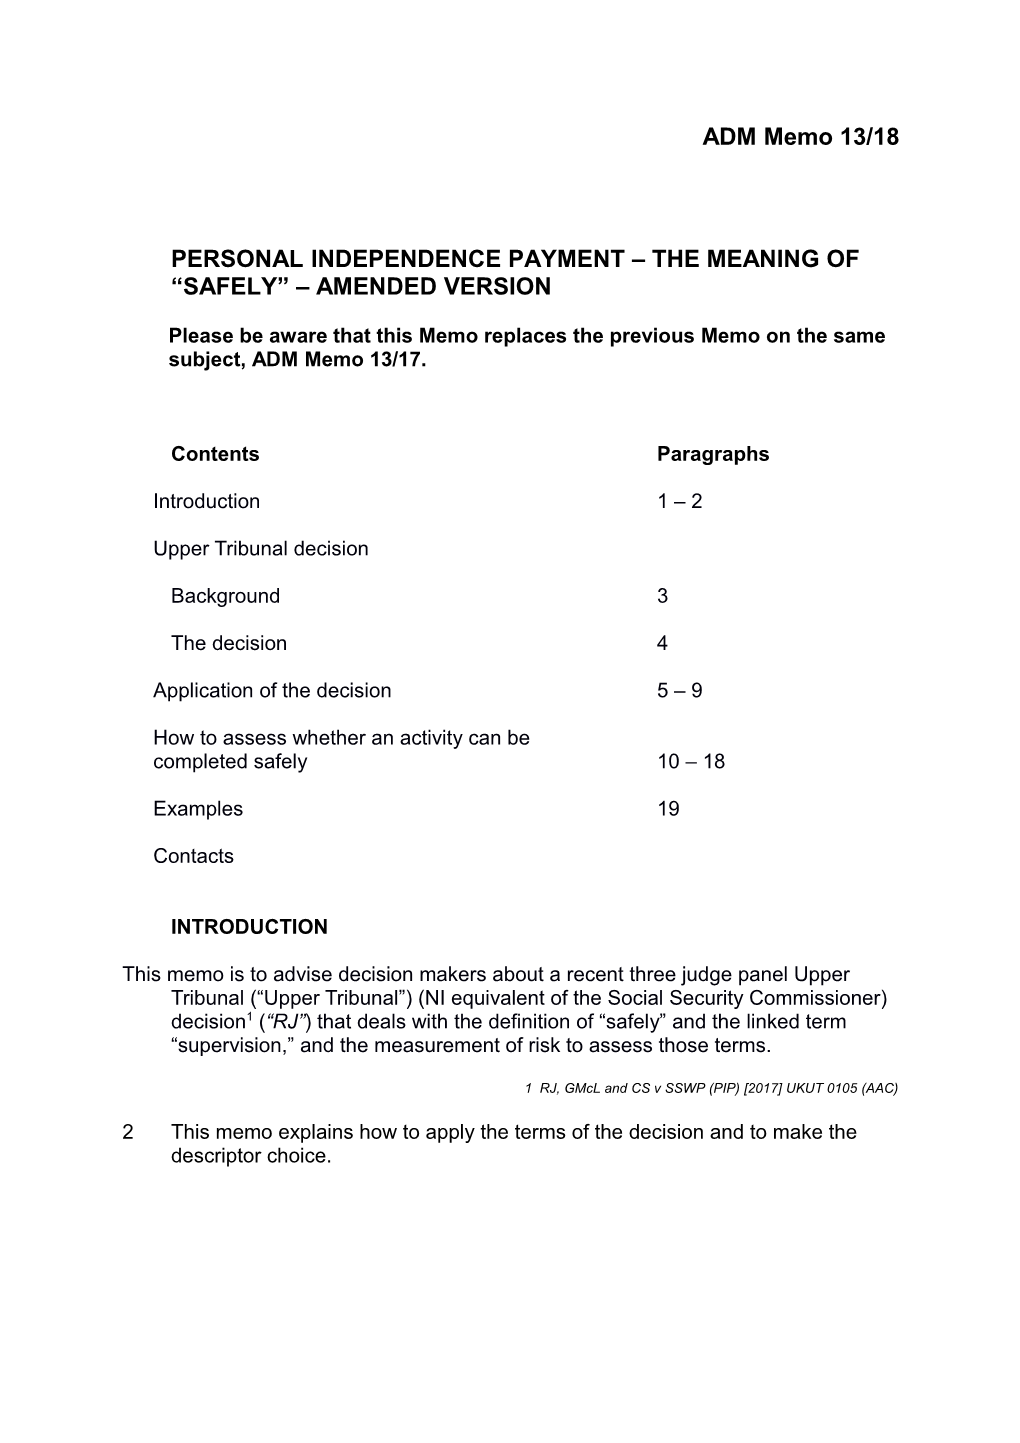 Personal Independence Payment the Meaning of Safely AMENDED VERSION